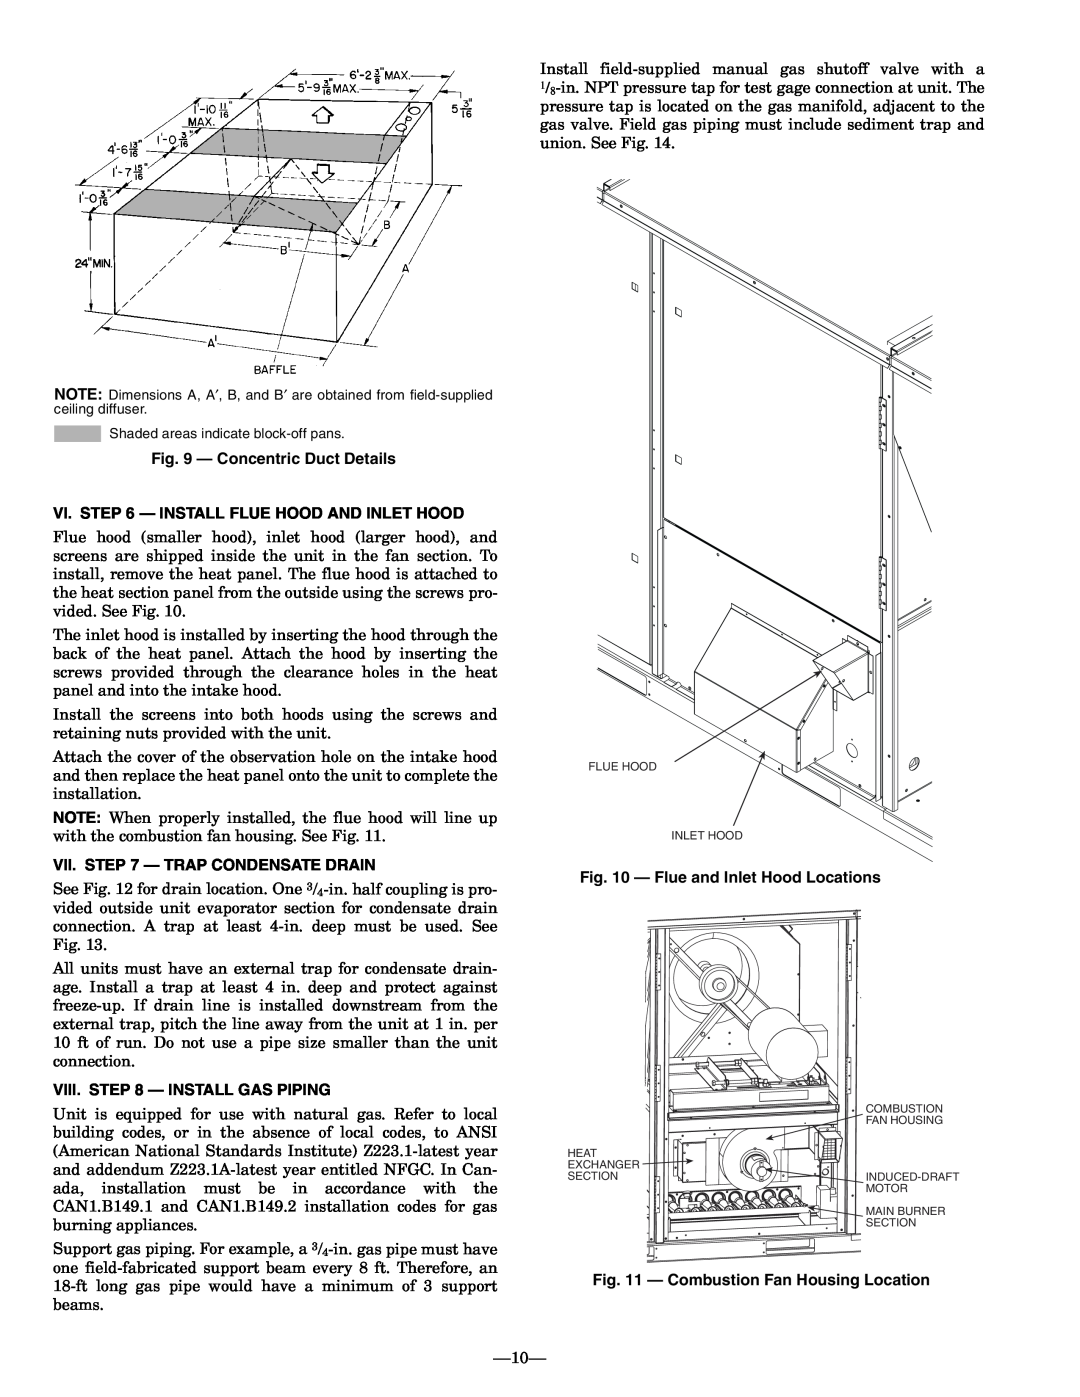 Bryant 581A operation manual Concentric Duct Details, Vi. - Install Flue Hood And Inlet Hood, Vii. - Trap Condensate Drain 